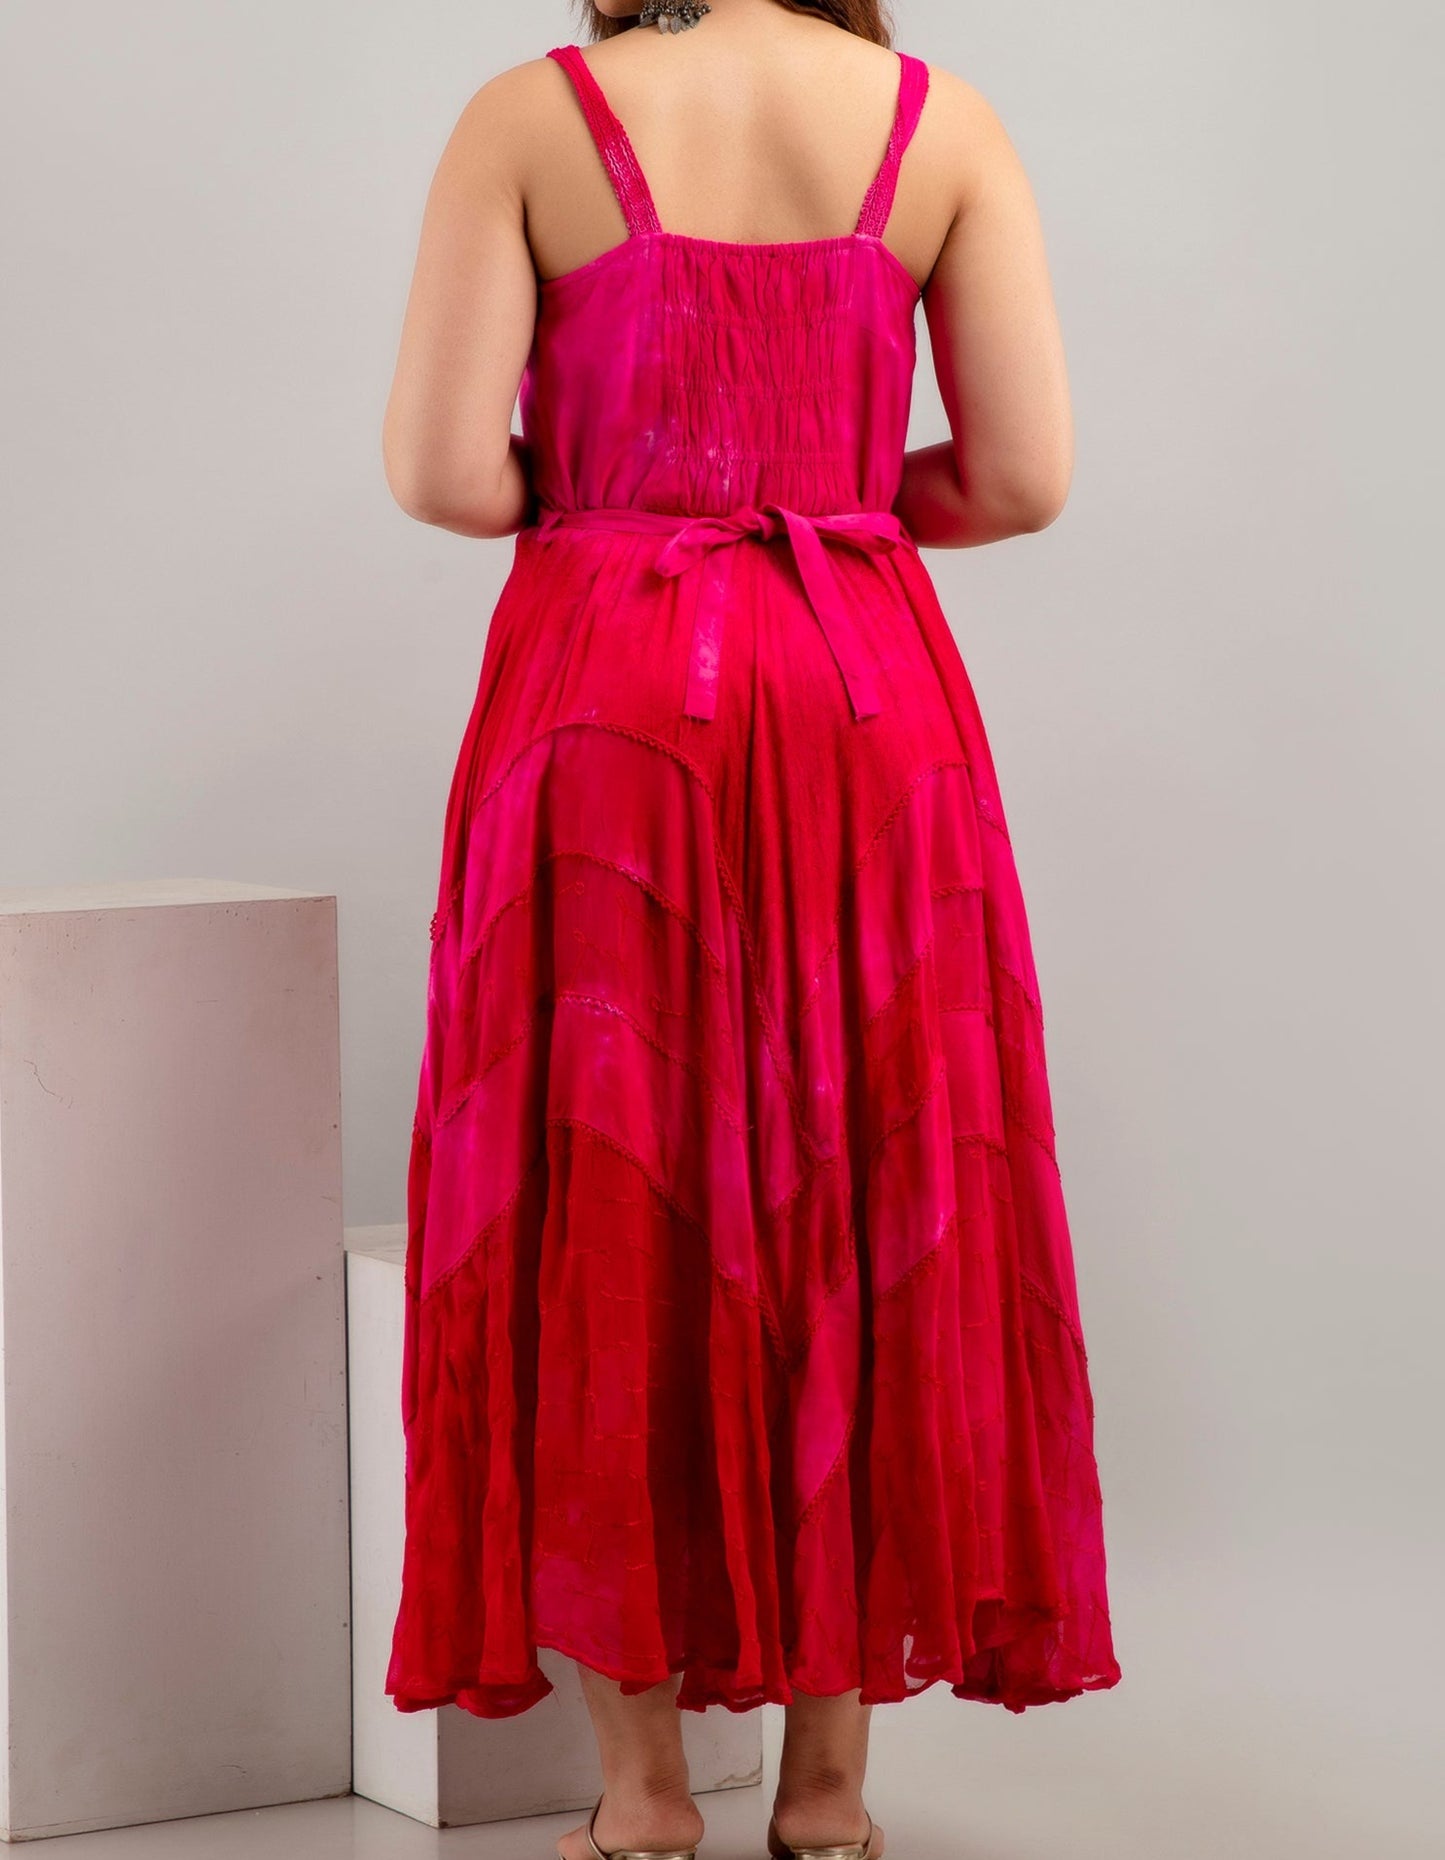 Lace up Full Length Dress - Magenta Pink